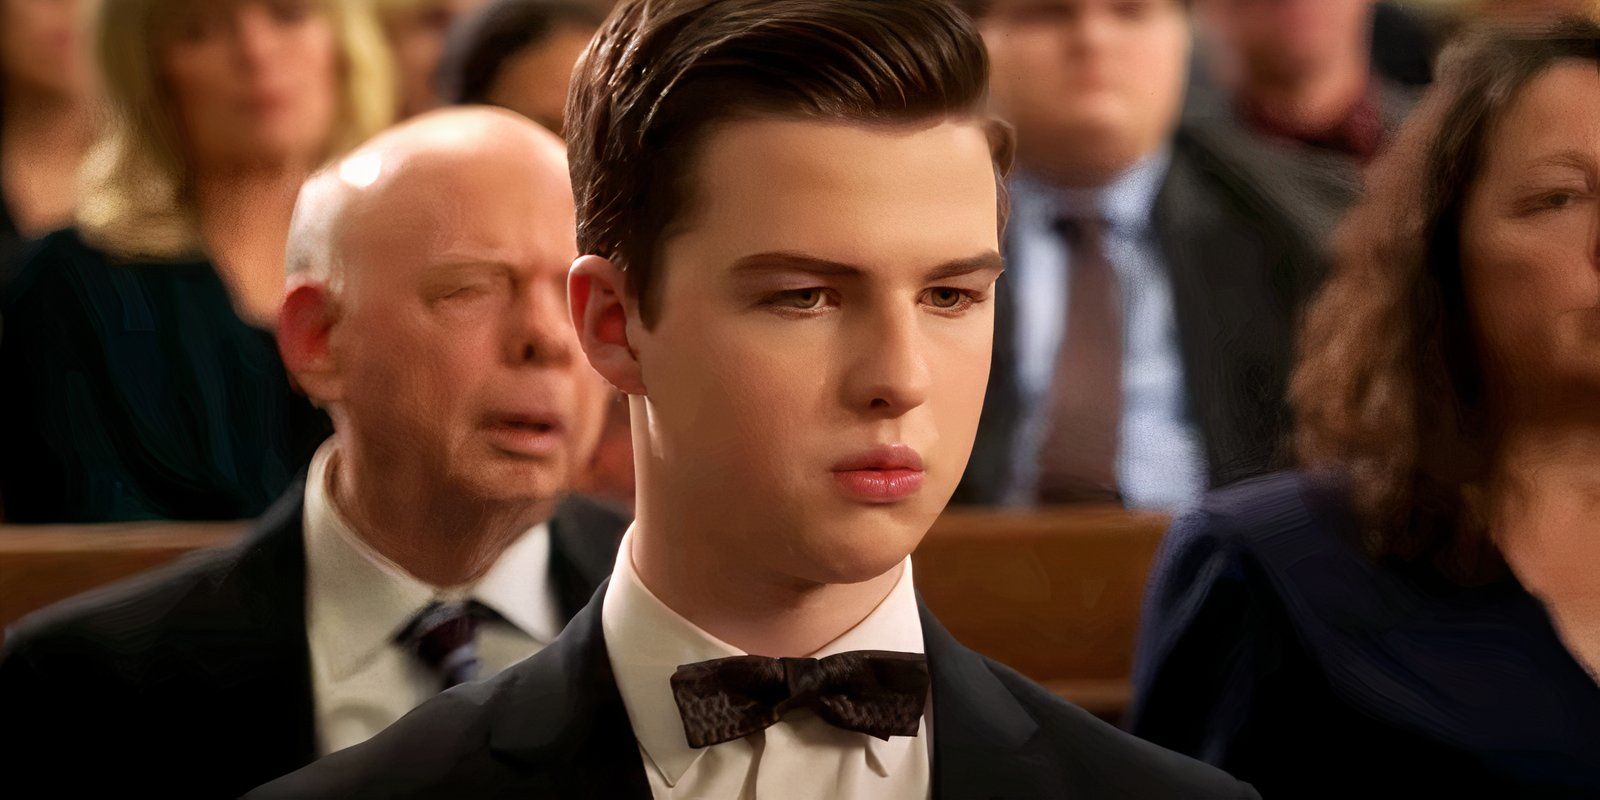 Sheldon wearing a black suit at George's funeral in Young Sheldon